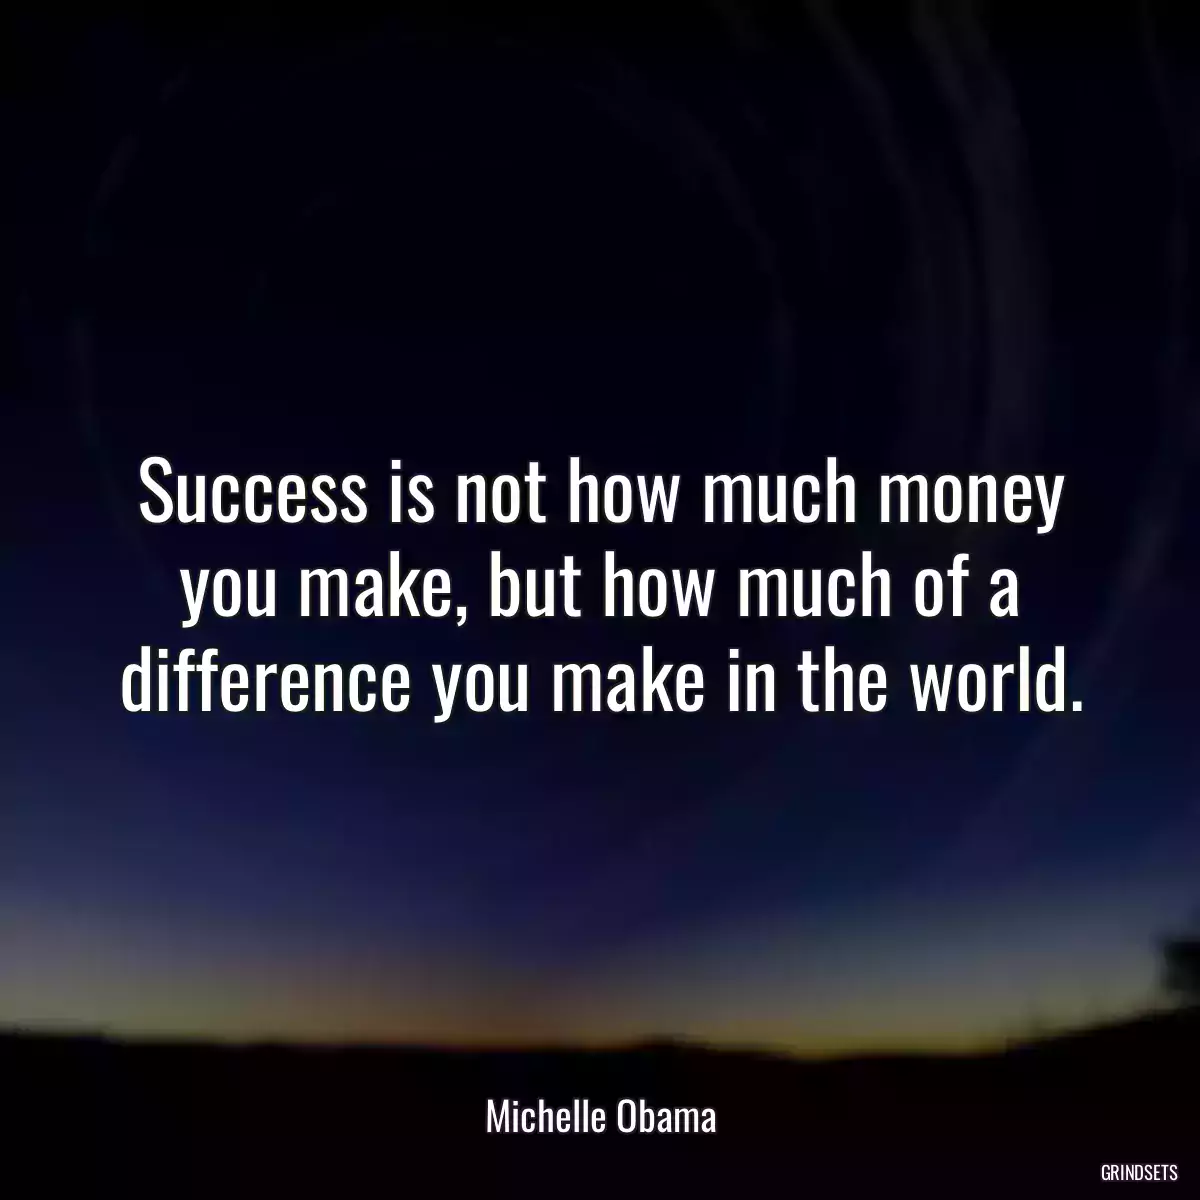 Success is not how much money you make, but how much of a difference you make in the world.